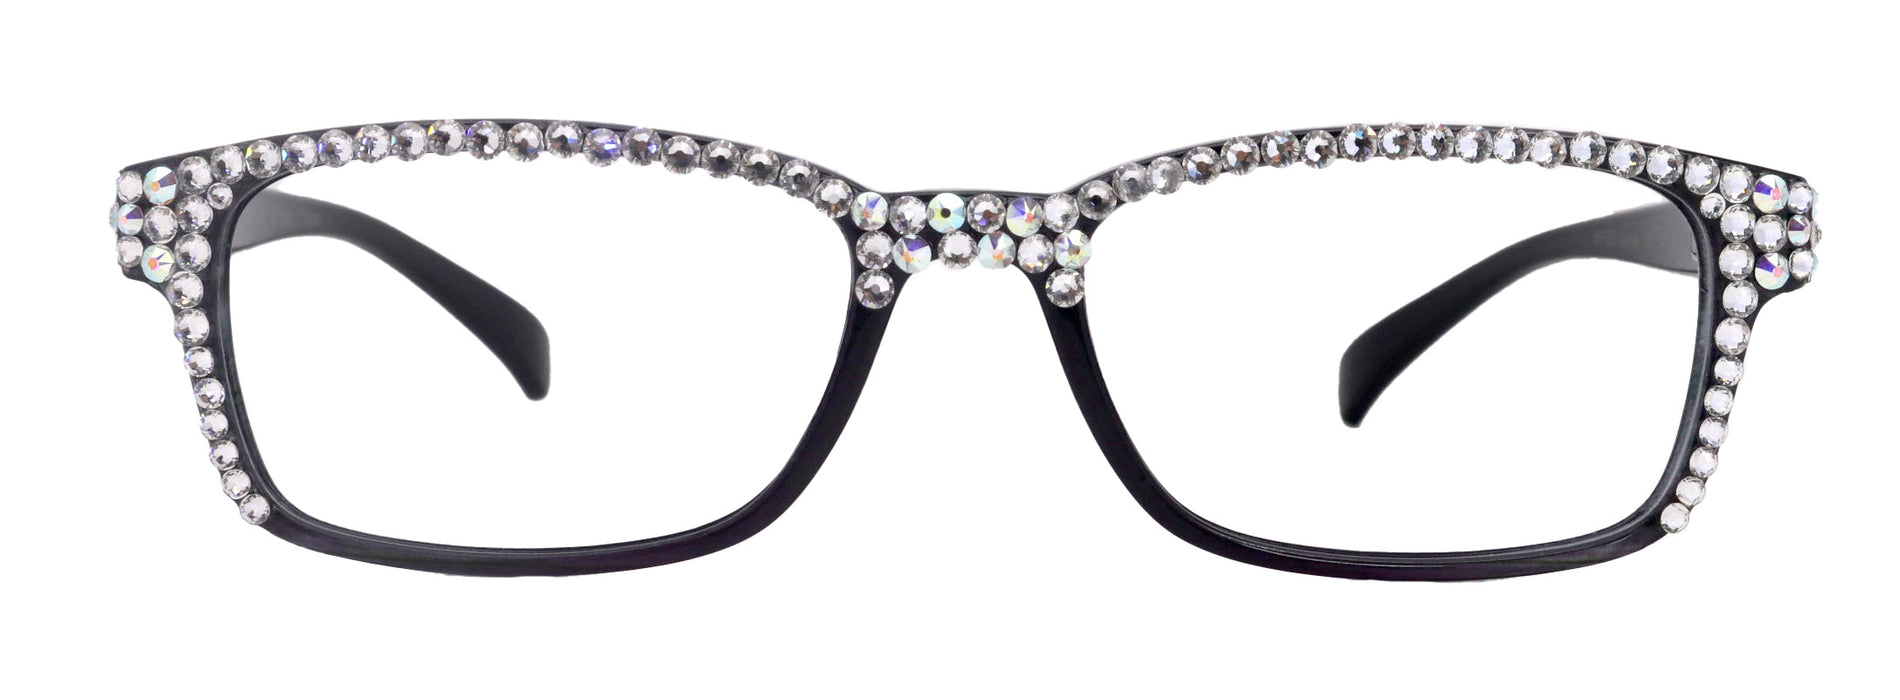 Olivia, (Bling) Women Reading Glasses Adorned with (Full Top) (Clear) Genuine European Crystals.  (Black, Grey) Square, NY fifth avenue.